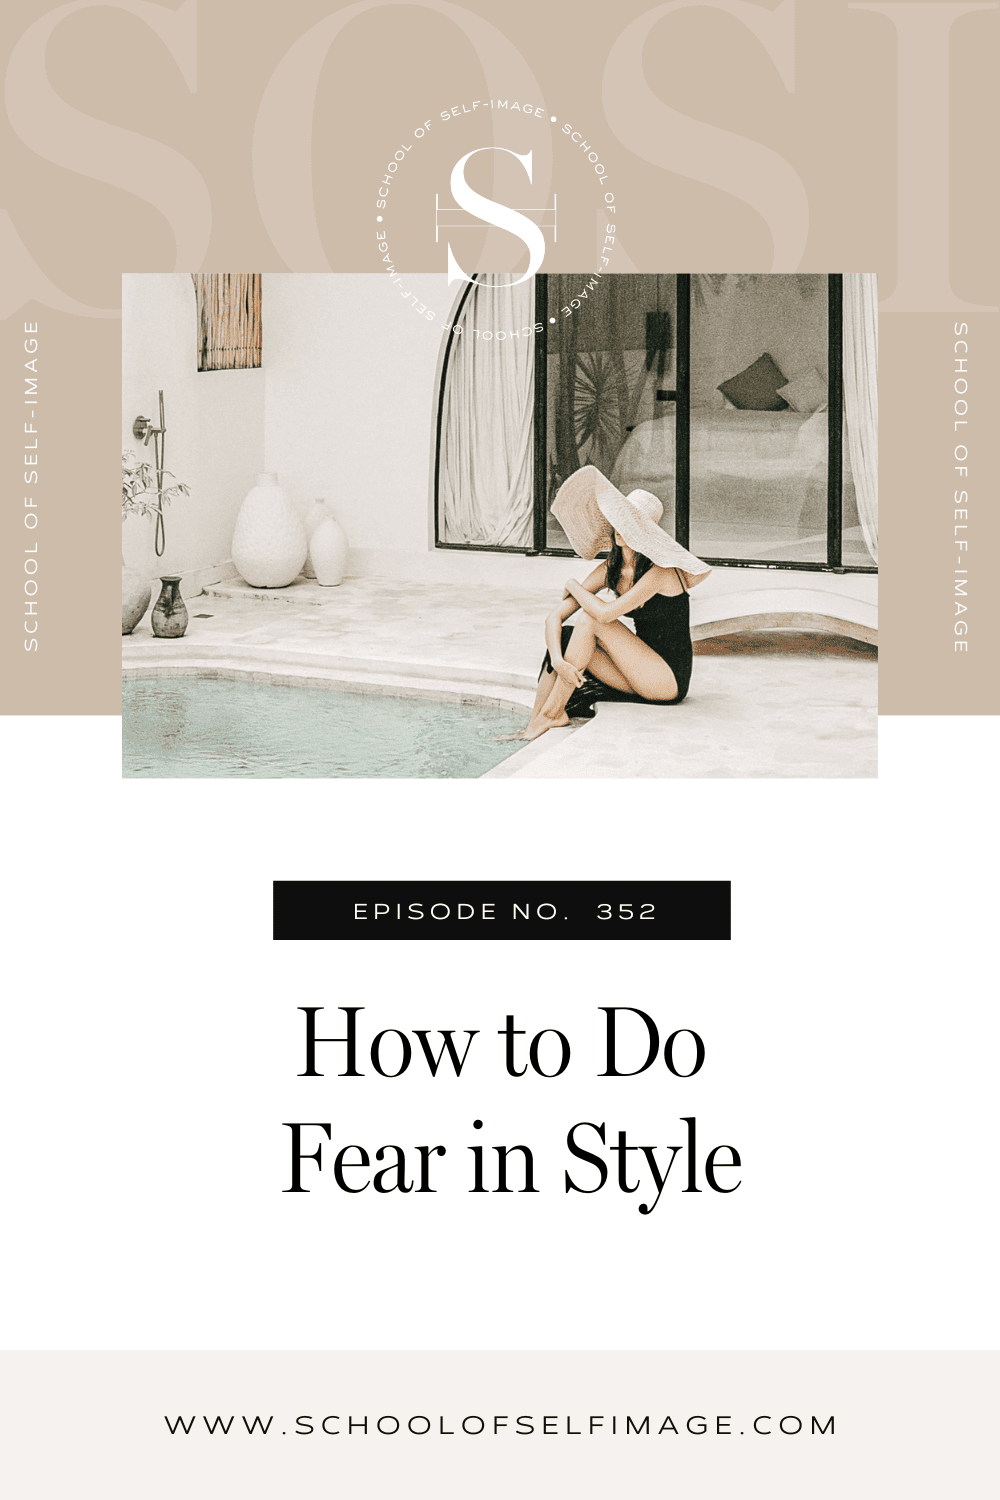 How to do Fear in Style